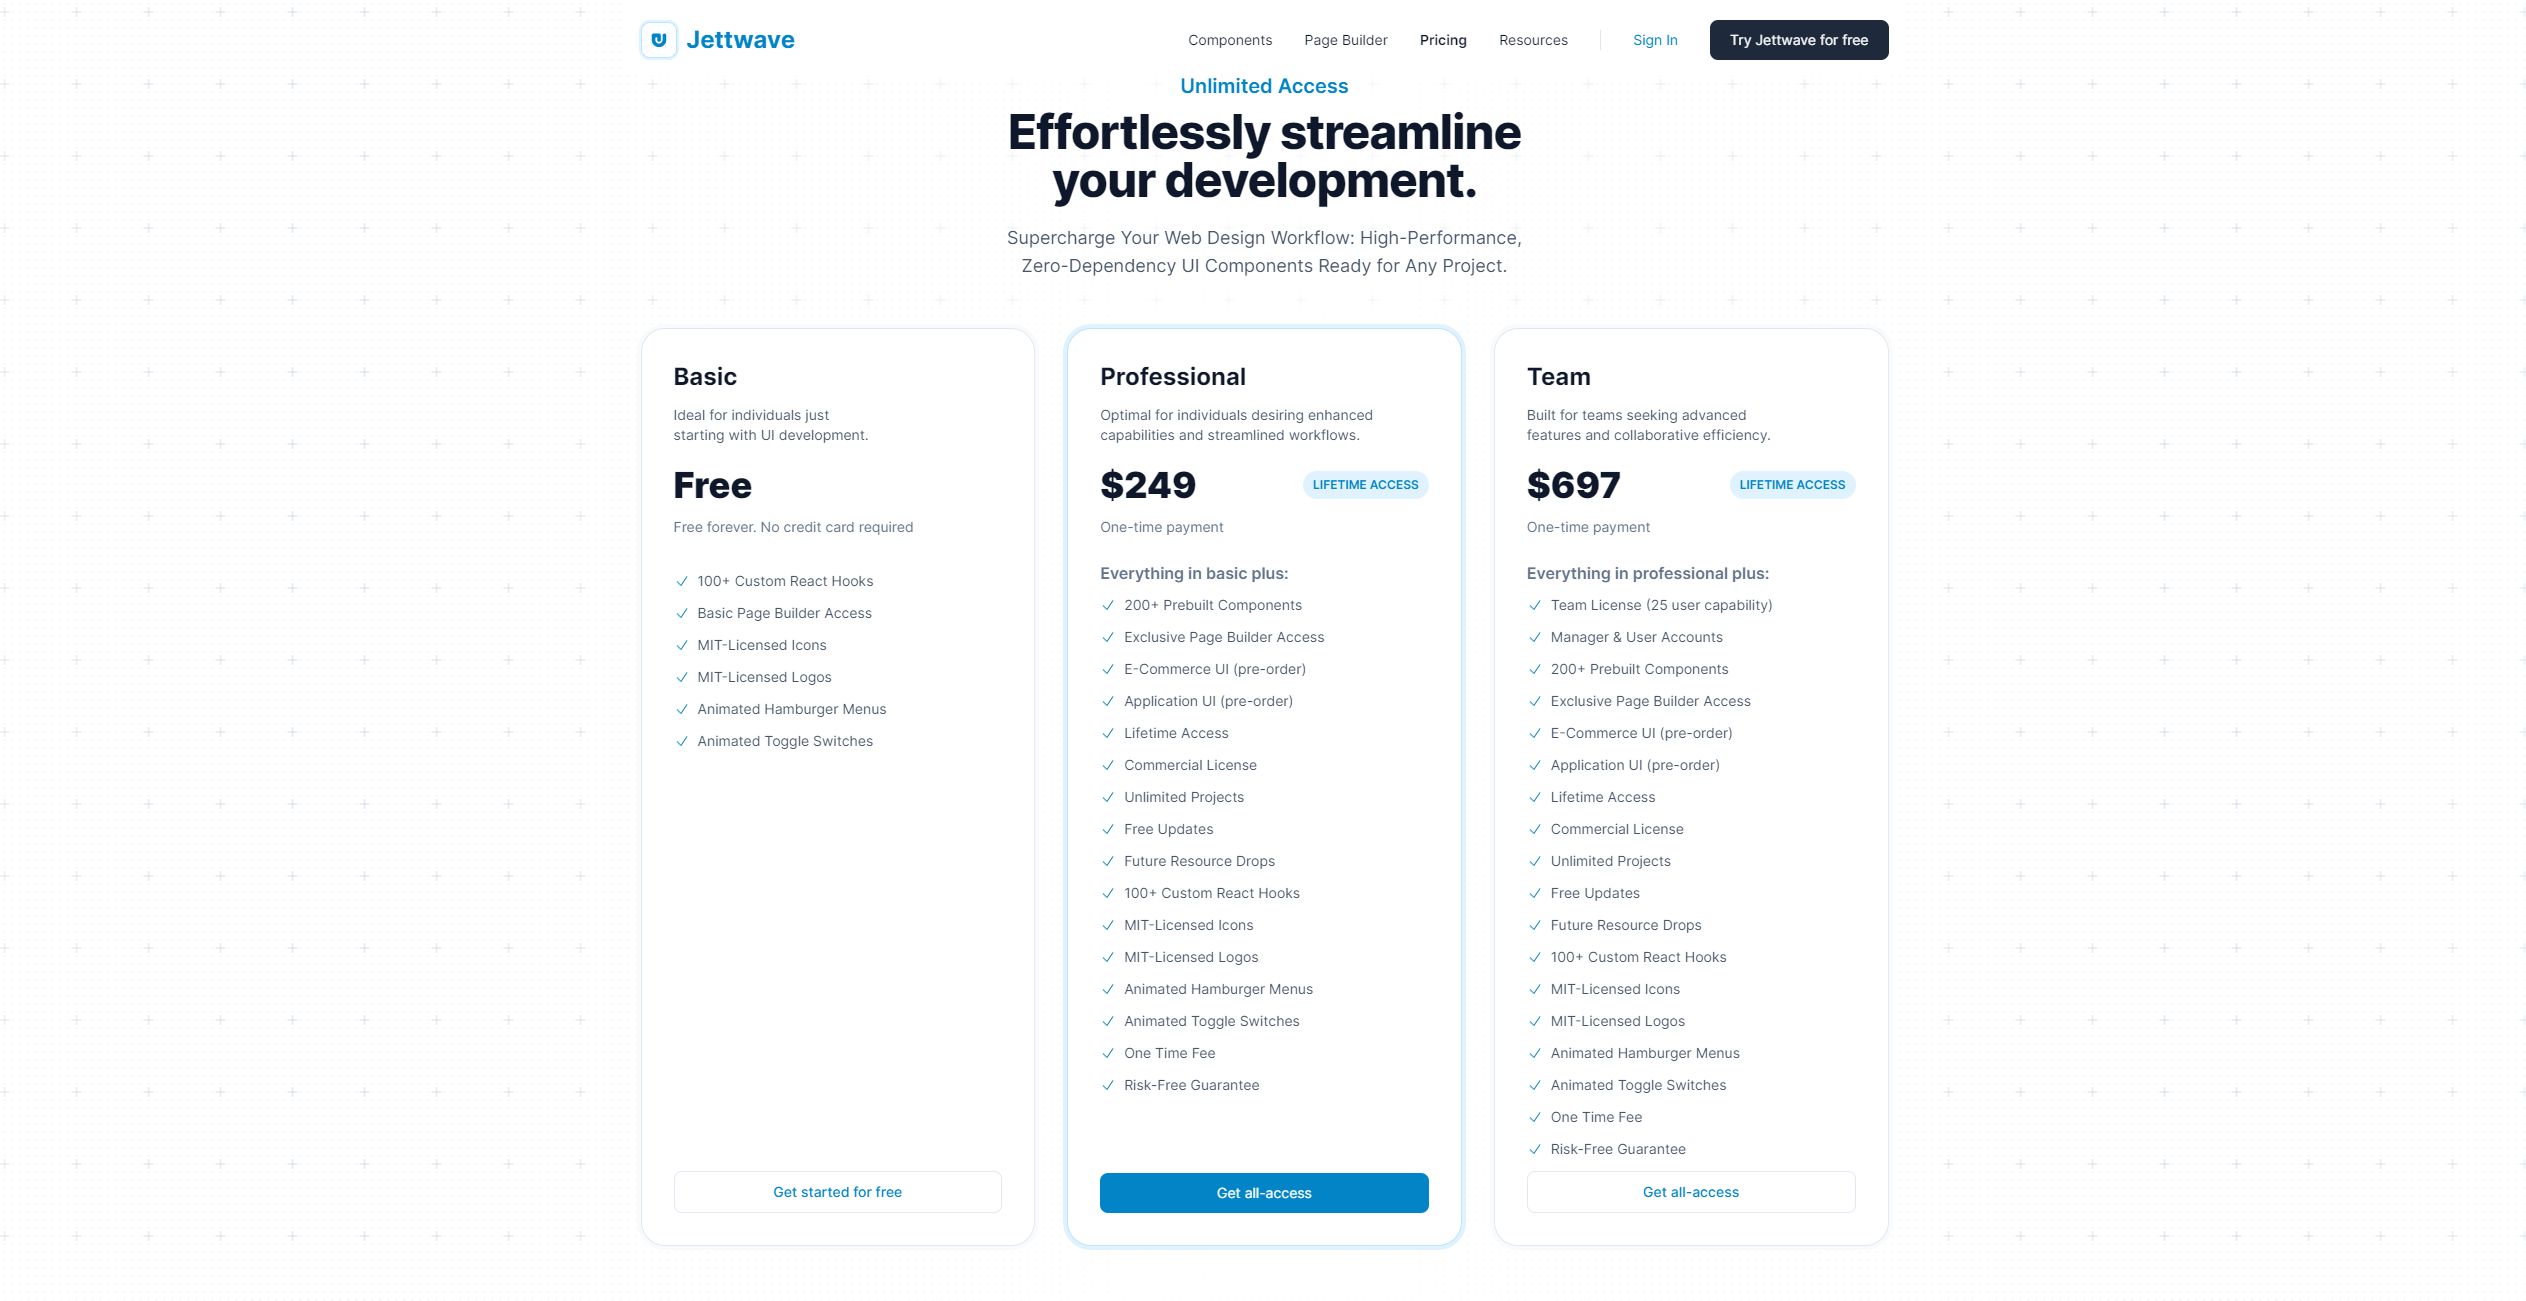 An image of Jettwave's pricing page